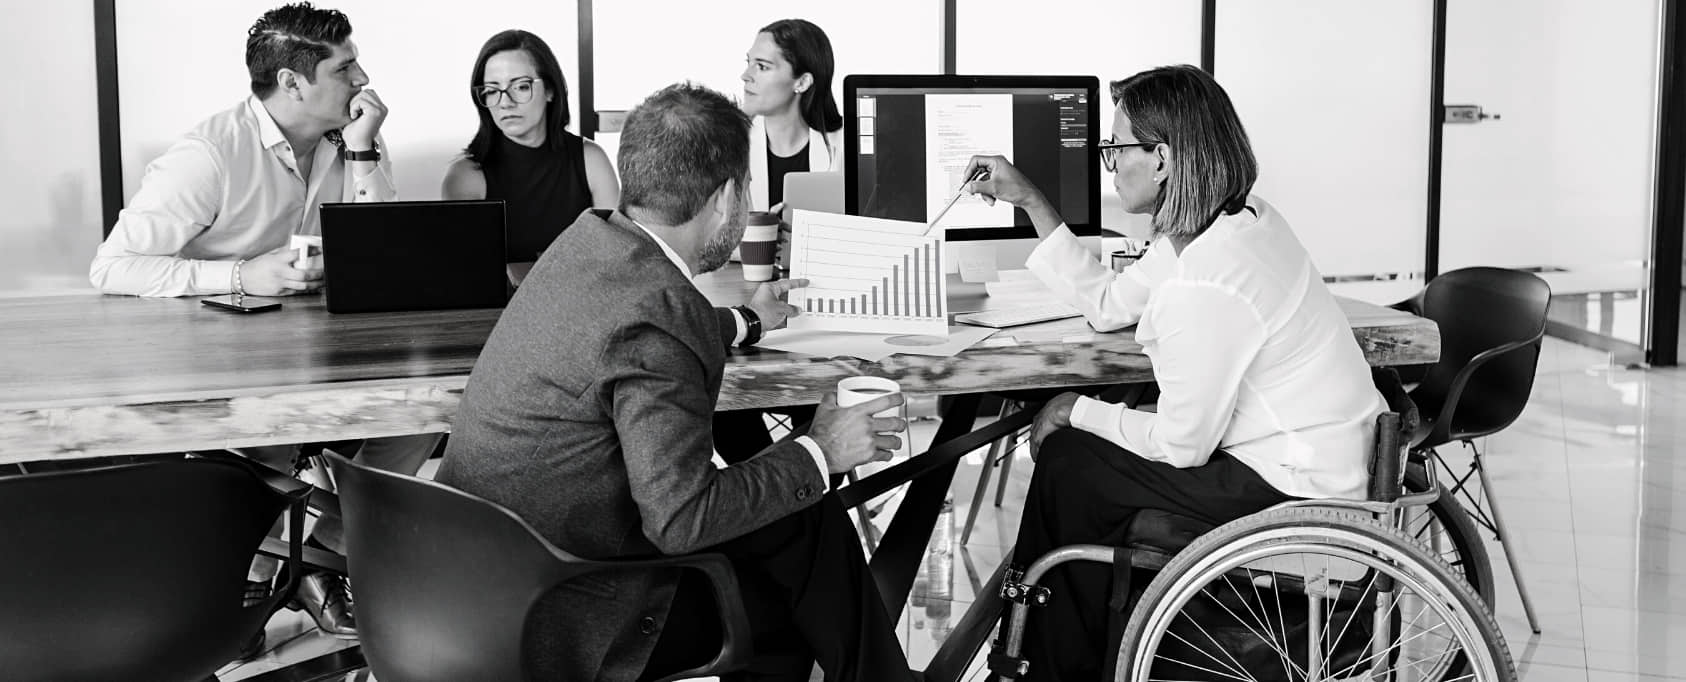 5 Ways to Improve Accessibility at Work